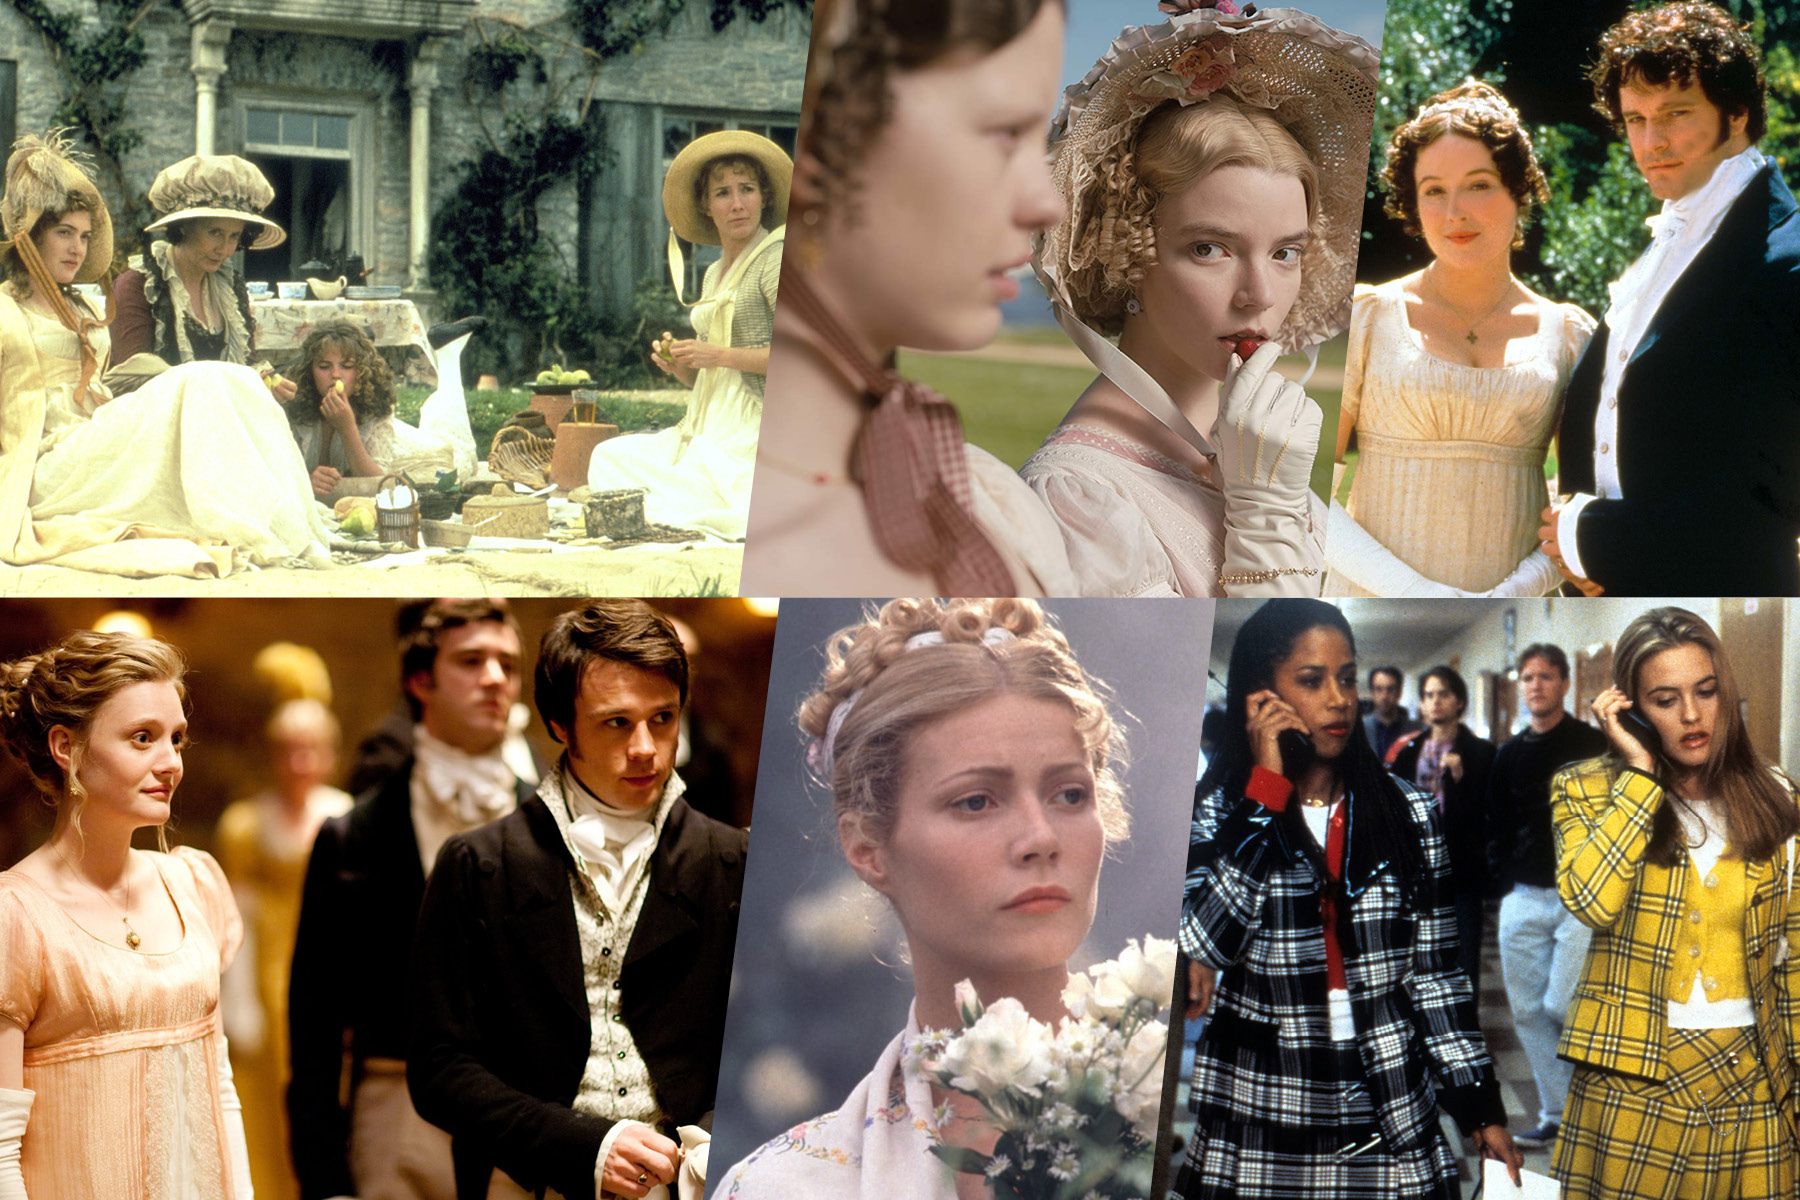 A collage of stills from different Jane Austen film adaptations